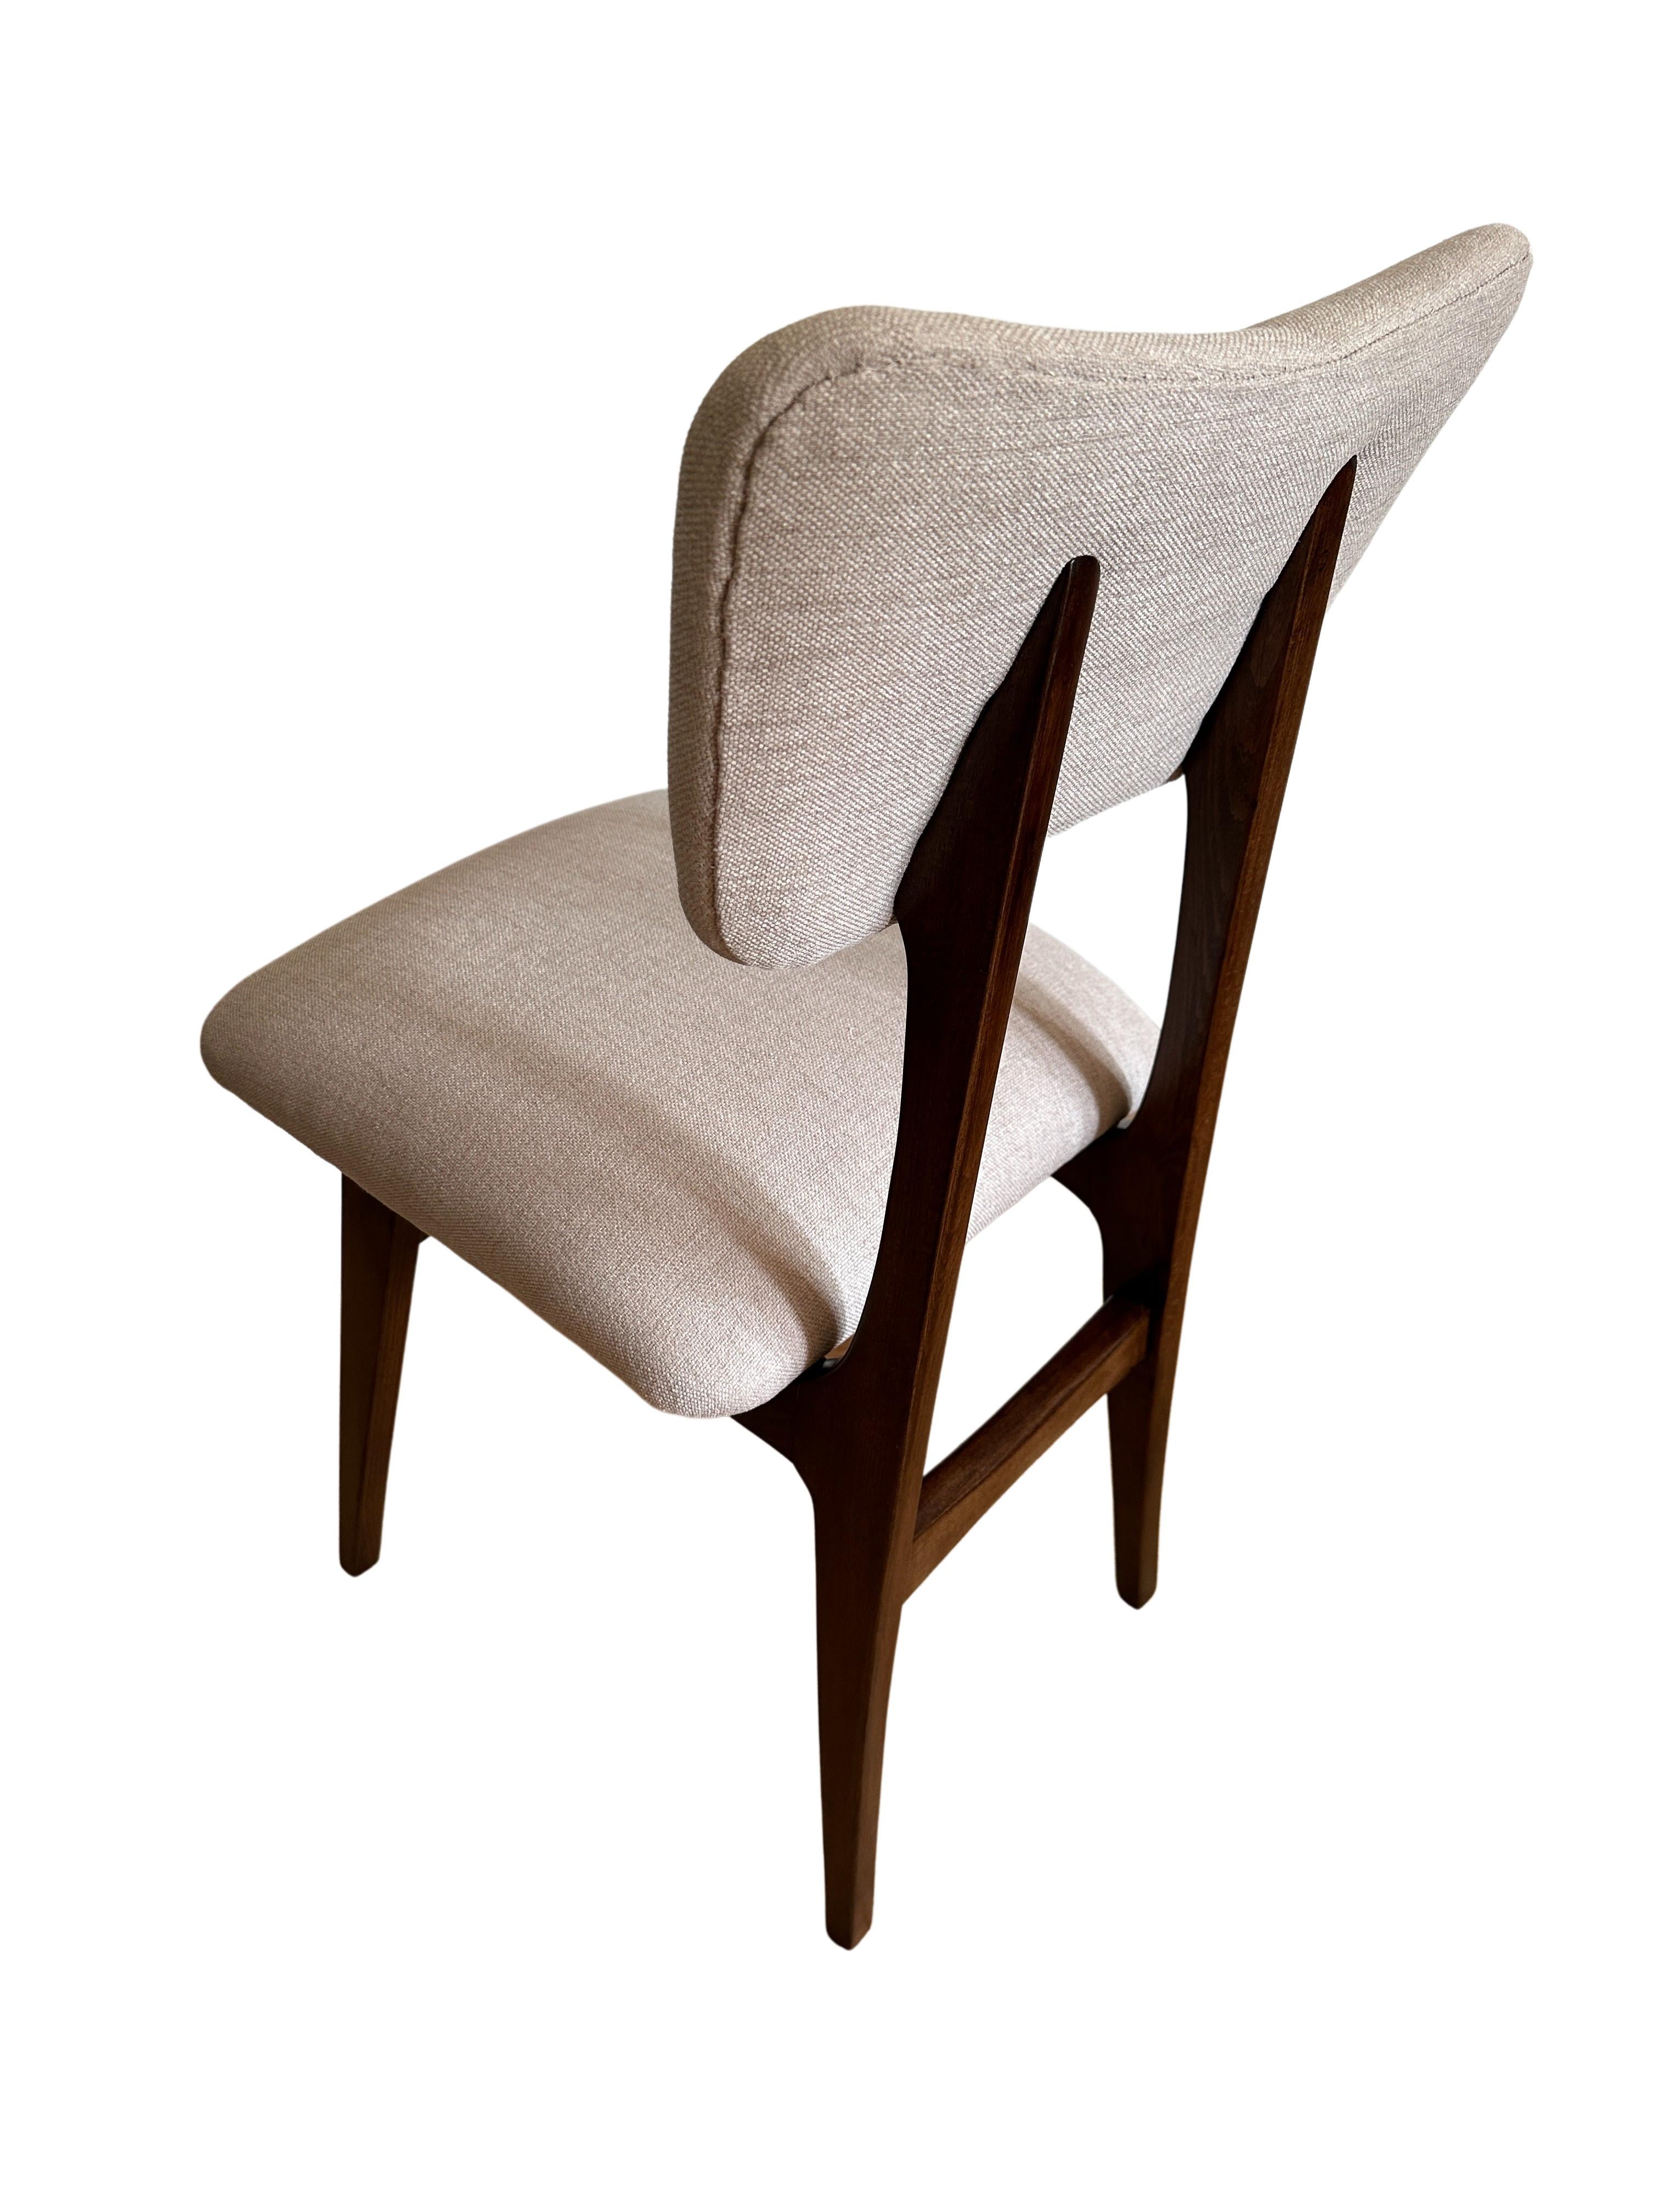 Hand-Crafted Set of Two Midcentury Beige Dining Chairs, Europe, 1960s For Sale